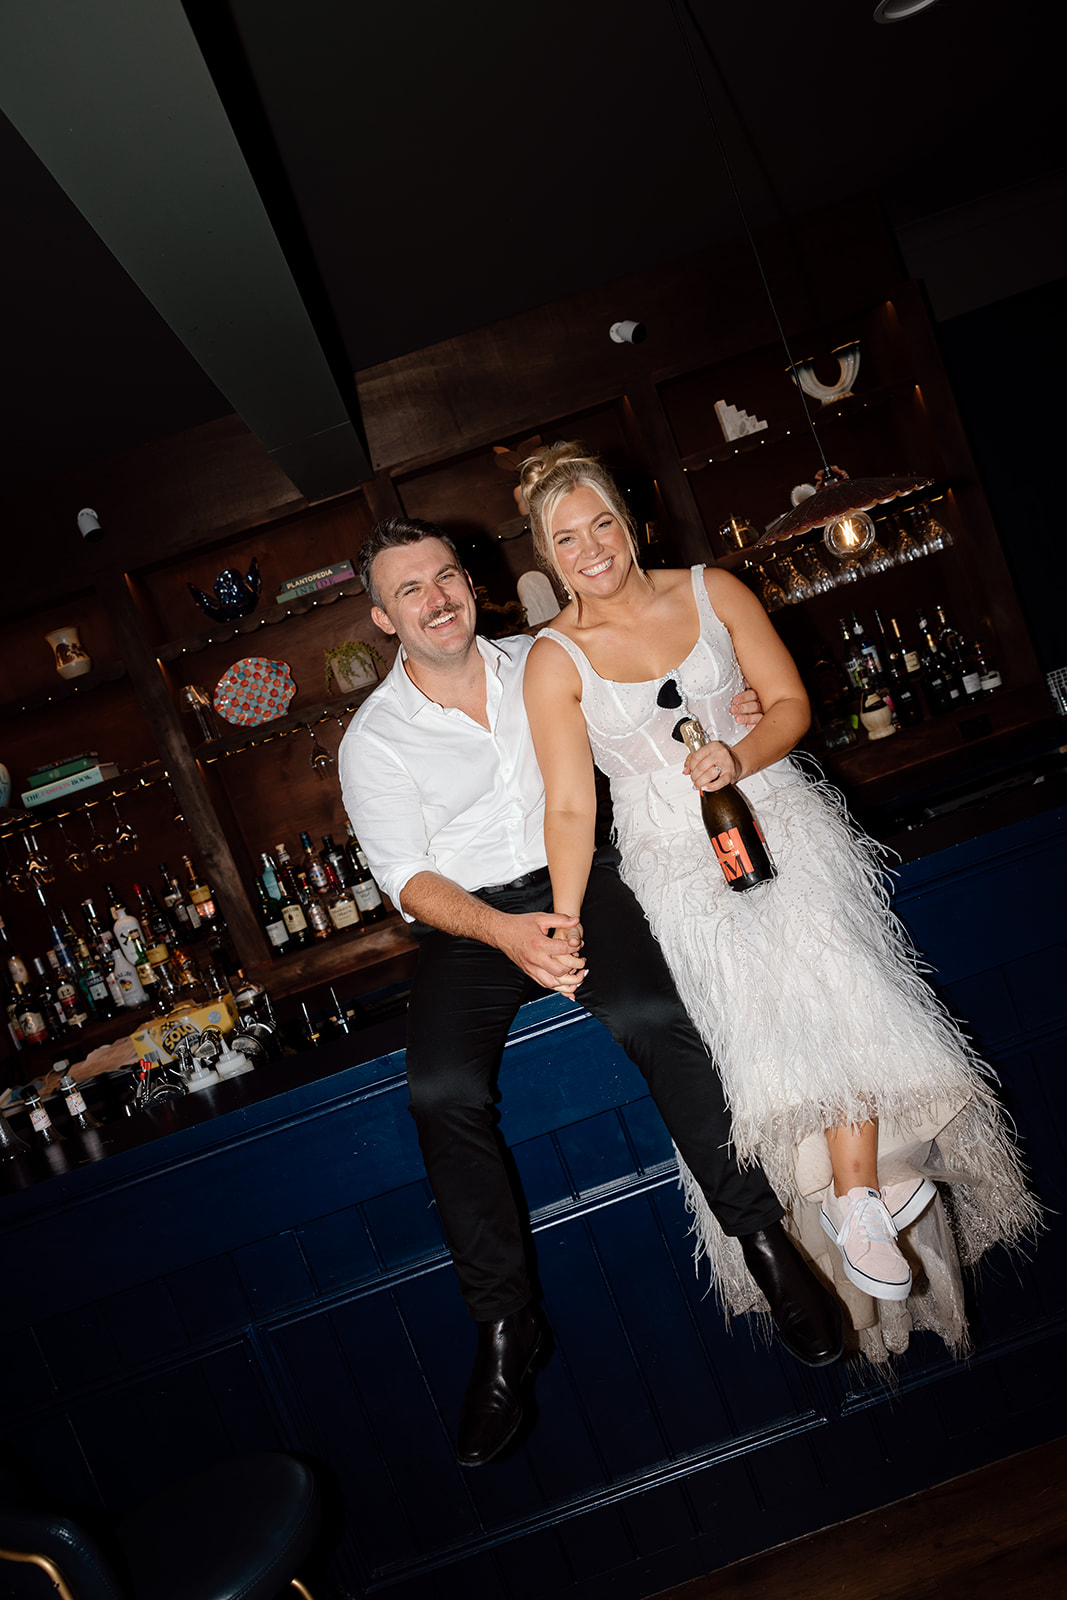 Night bridal portraits at the wedding in the South Coast The Lodge Jamberoo